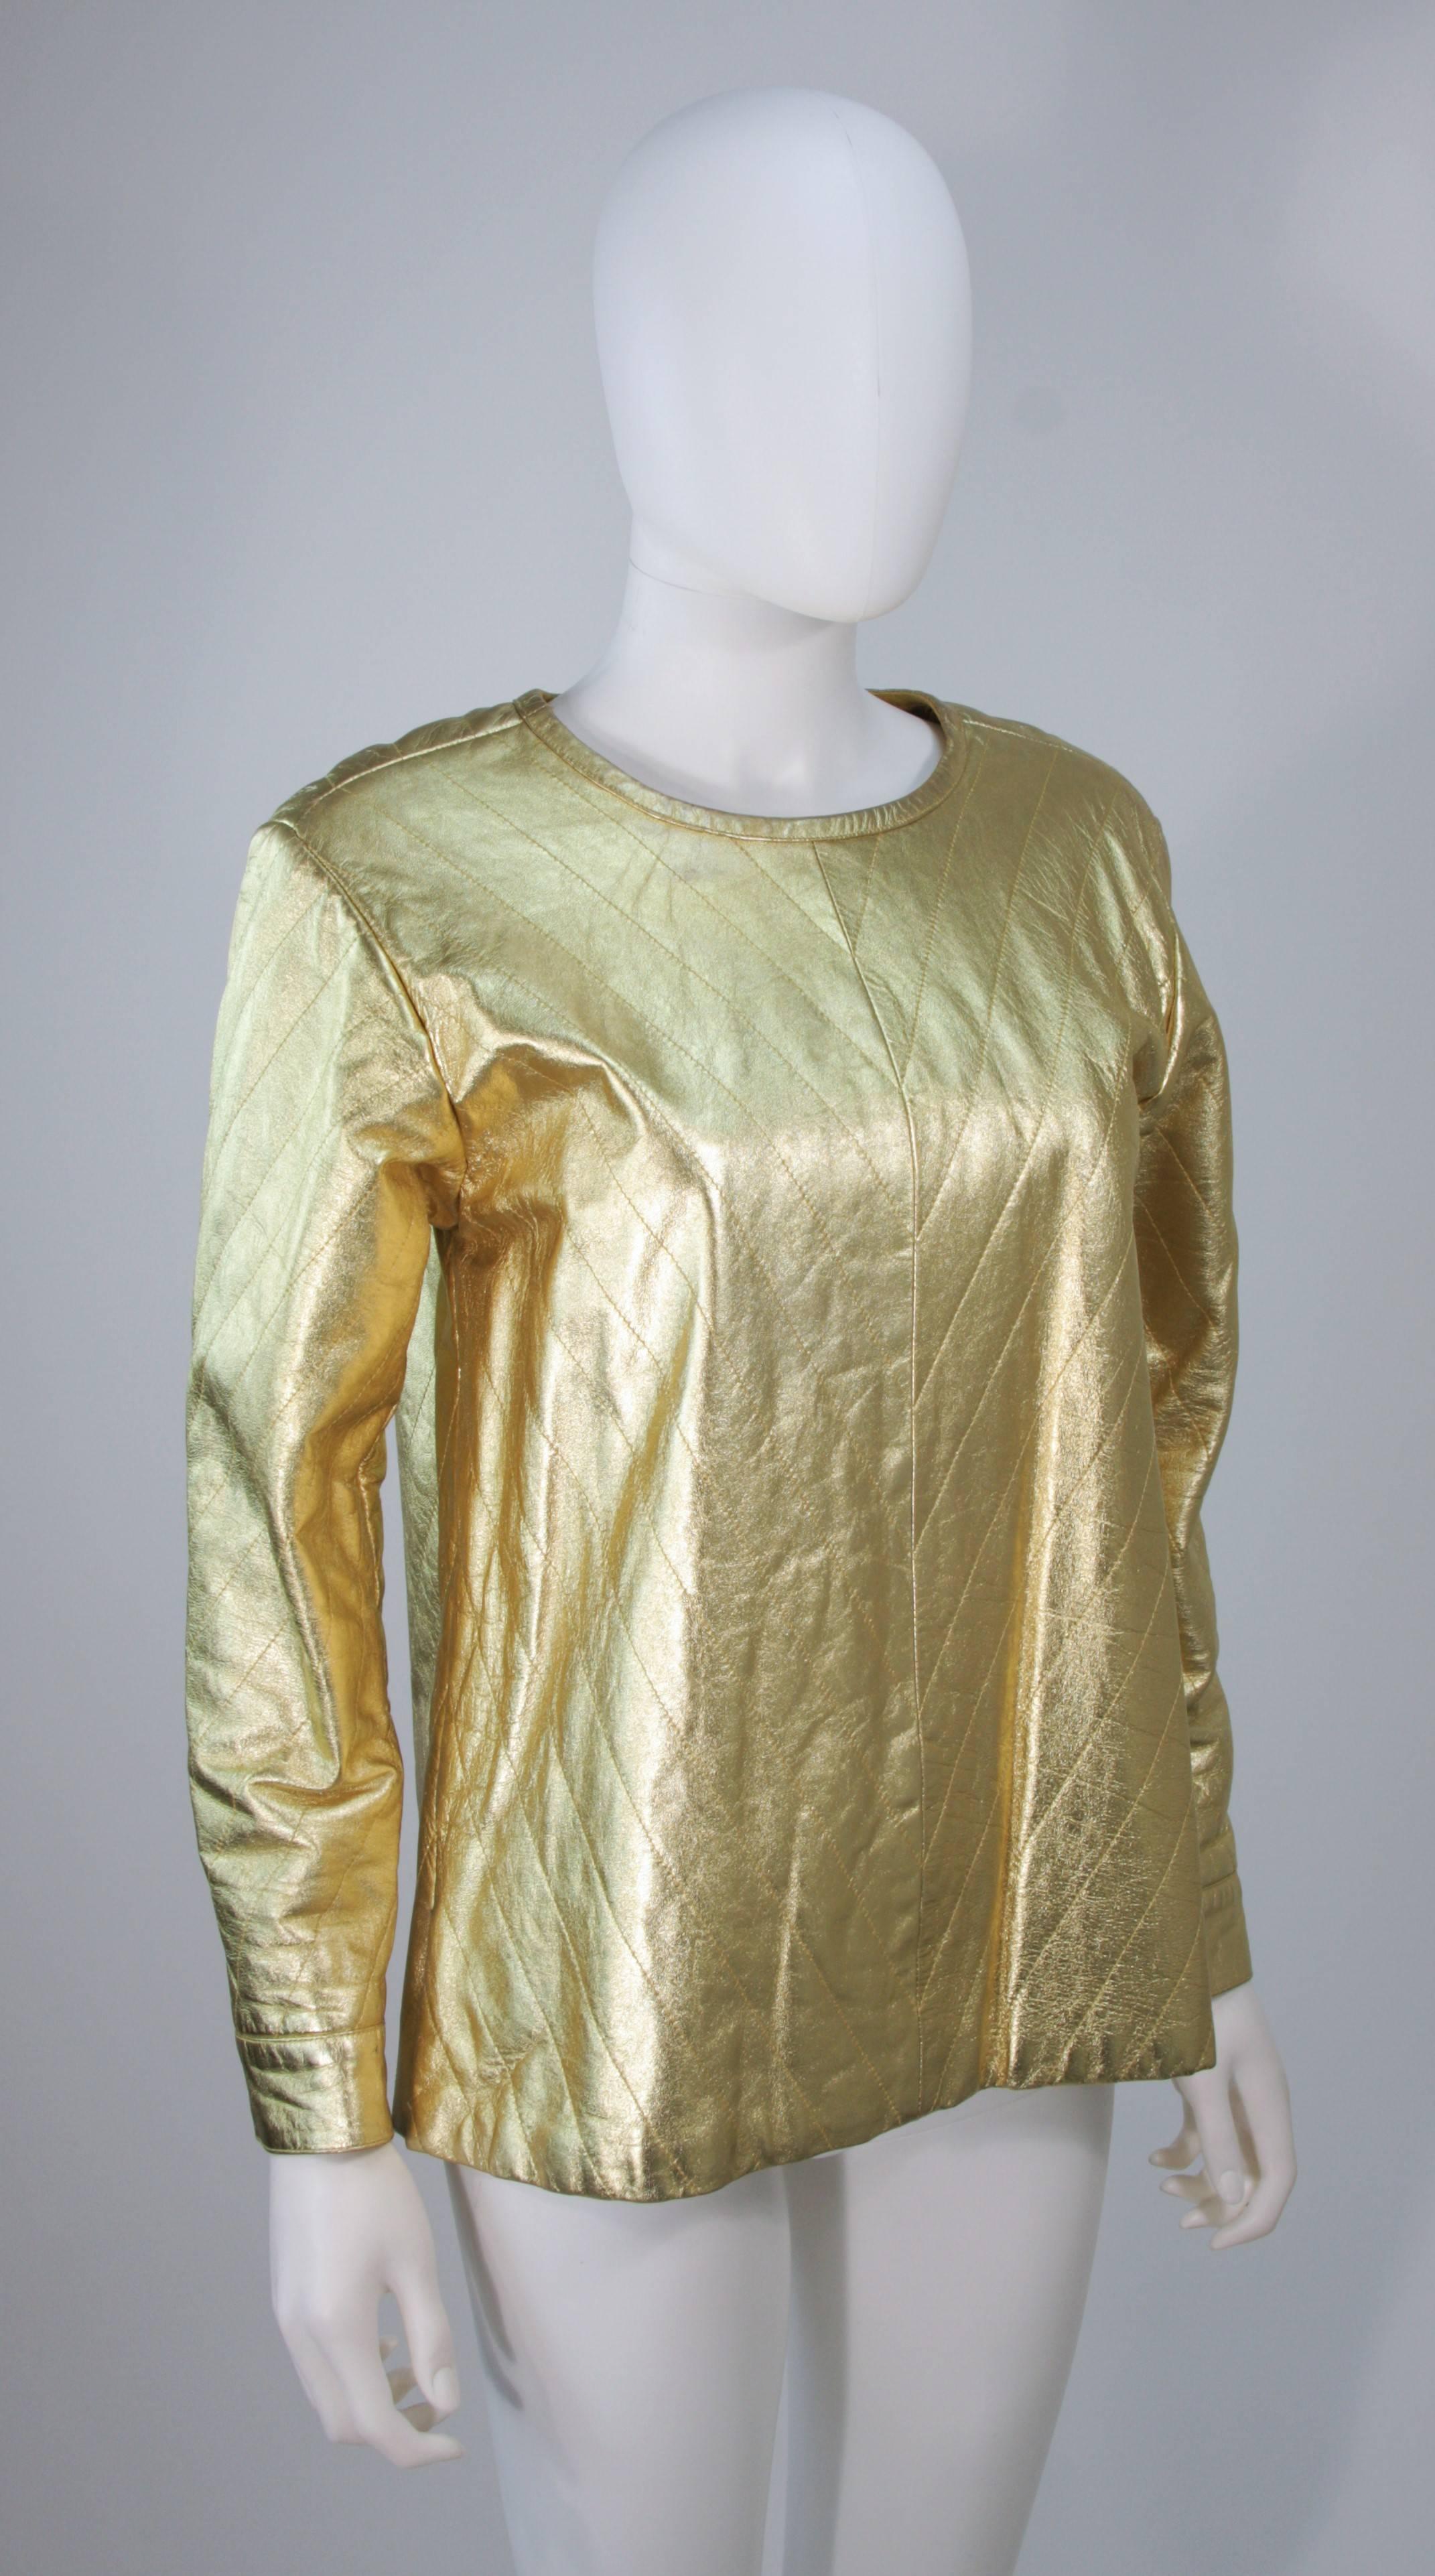 YVES SAINT LAURENT Gold Metallic Quilted Leather Top Size 38 In Excellent Condition For Sale In Los Angeles, CA